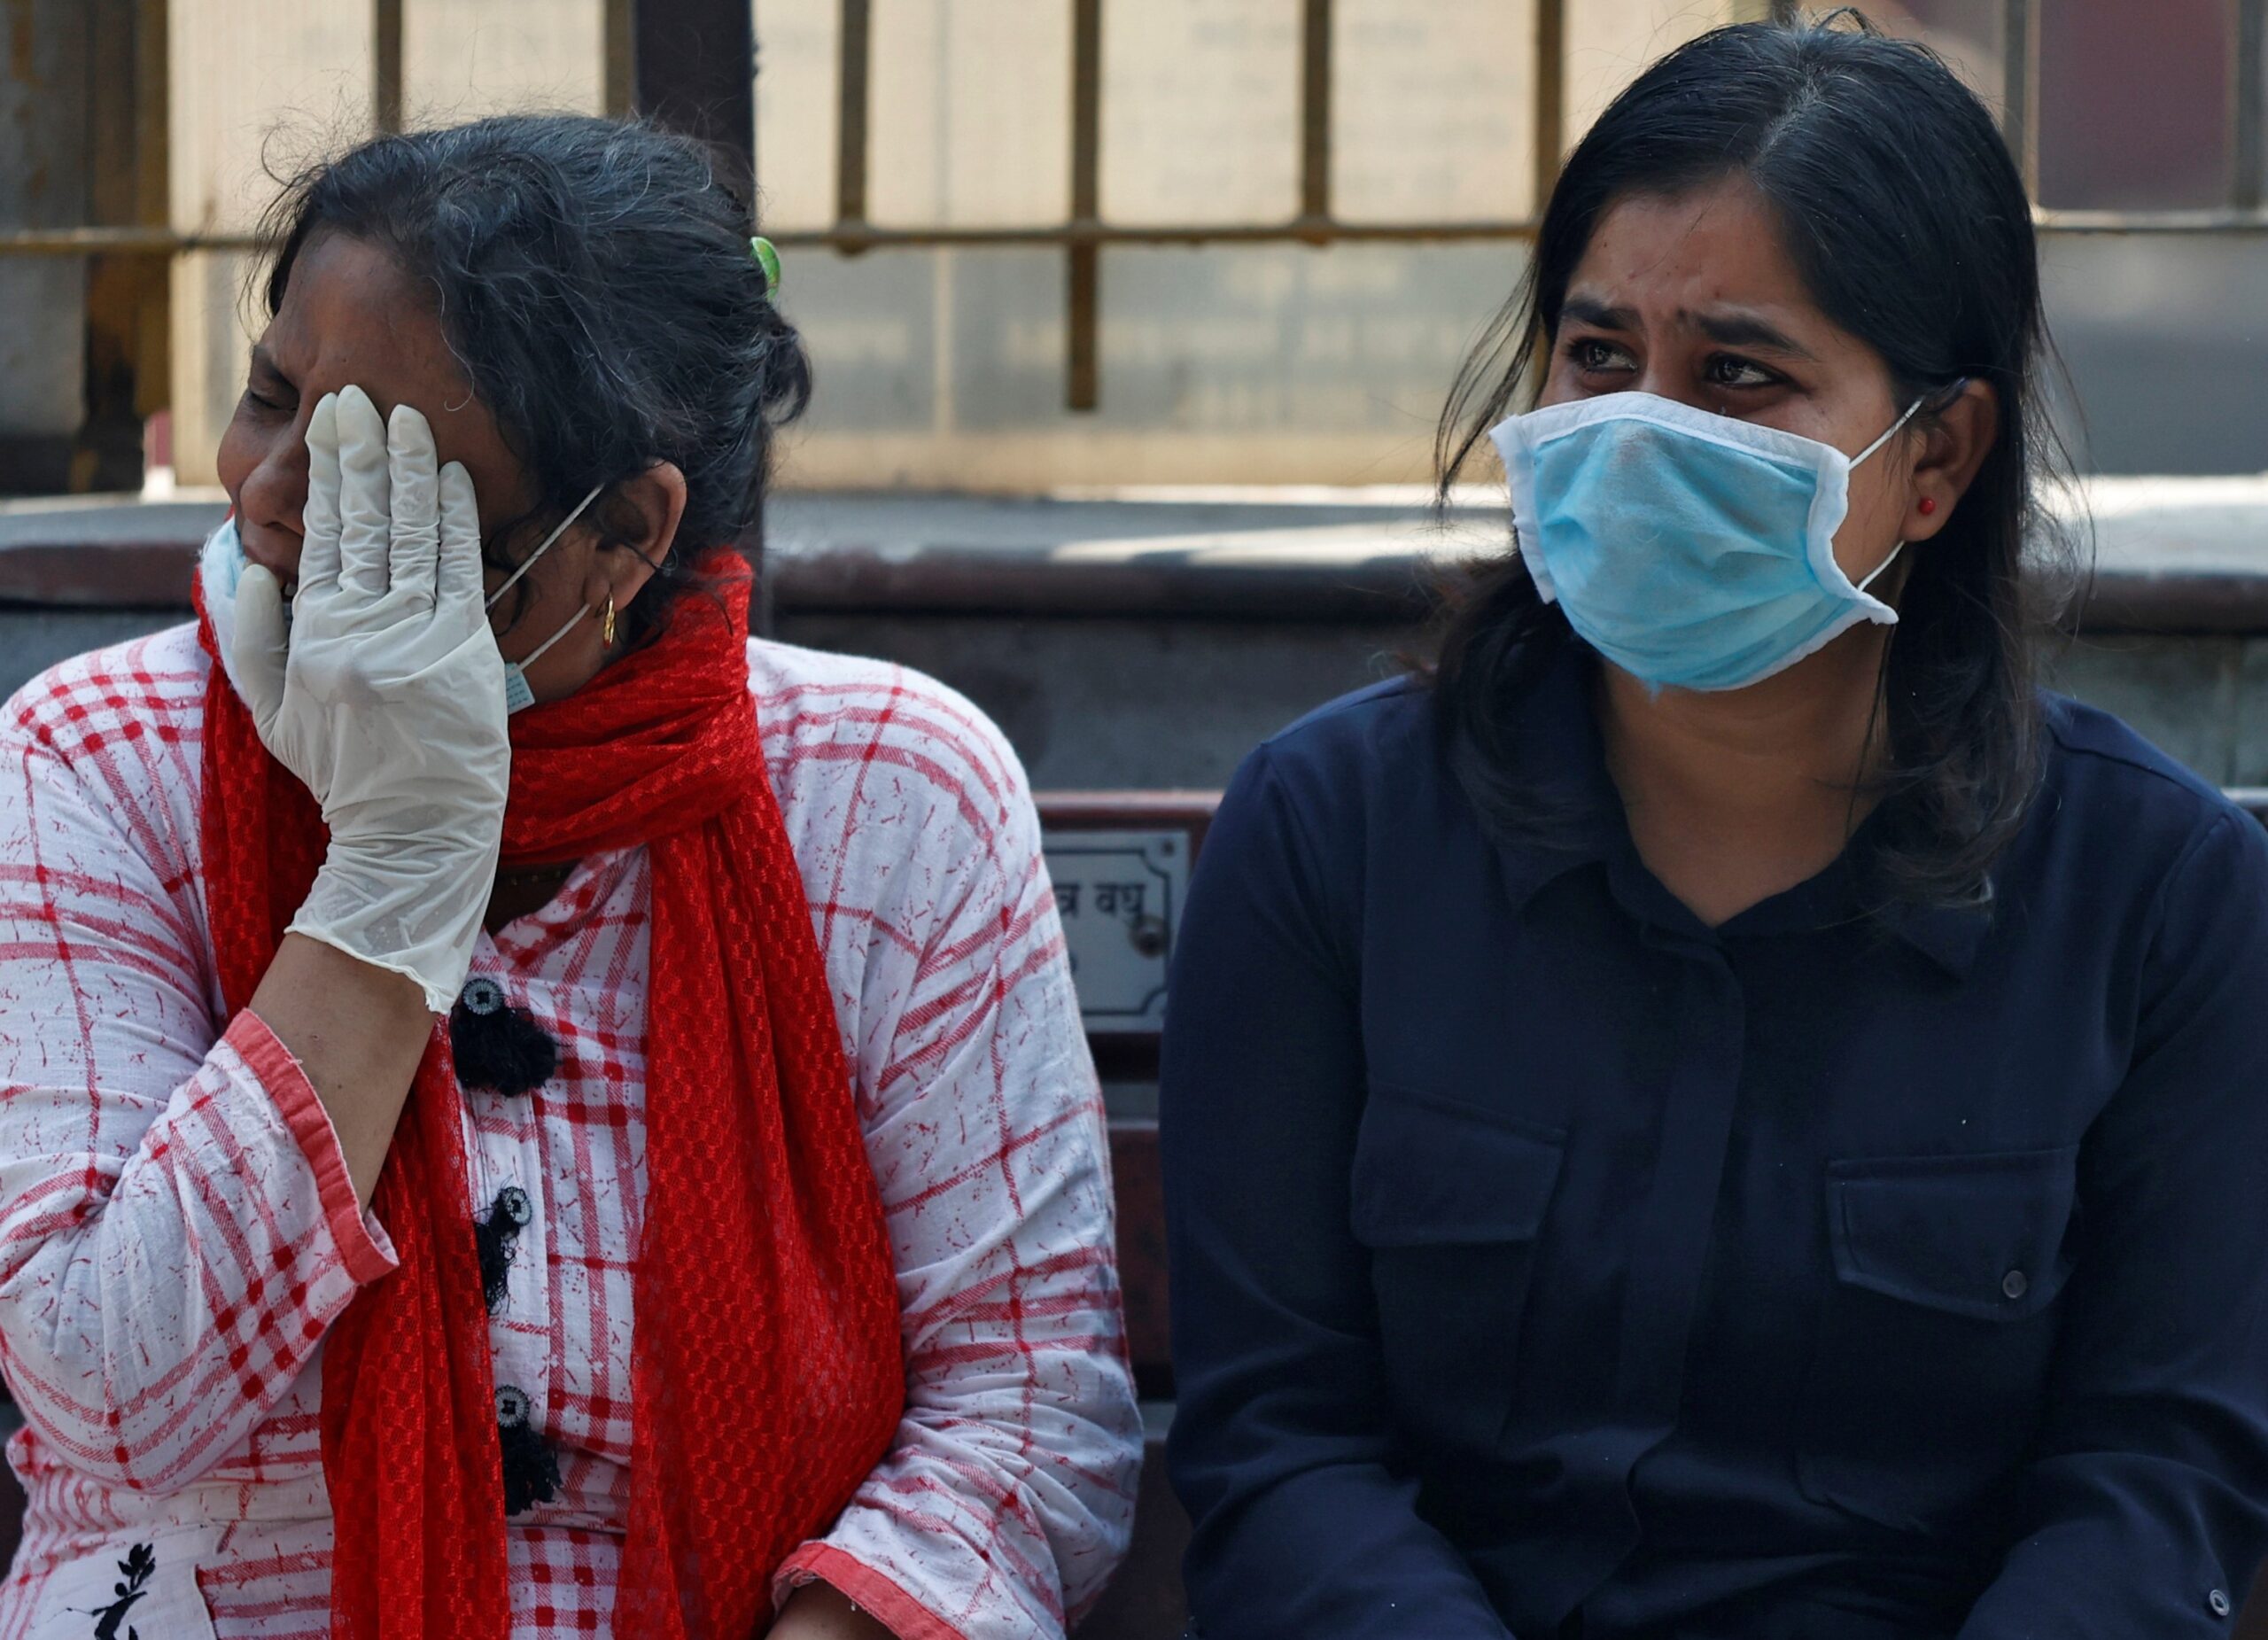 Family members of Virendra Gupta, who died due to the coronavirus disease (COVID-19), wear protective masks and gloves as they mourn during his cremation at Nigambodh Ghat crematorium in New Delhi, India, June 1, 2020. REUTERS/Danish Siddiqui